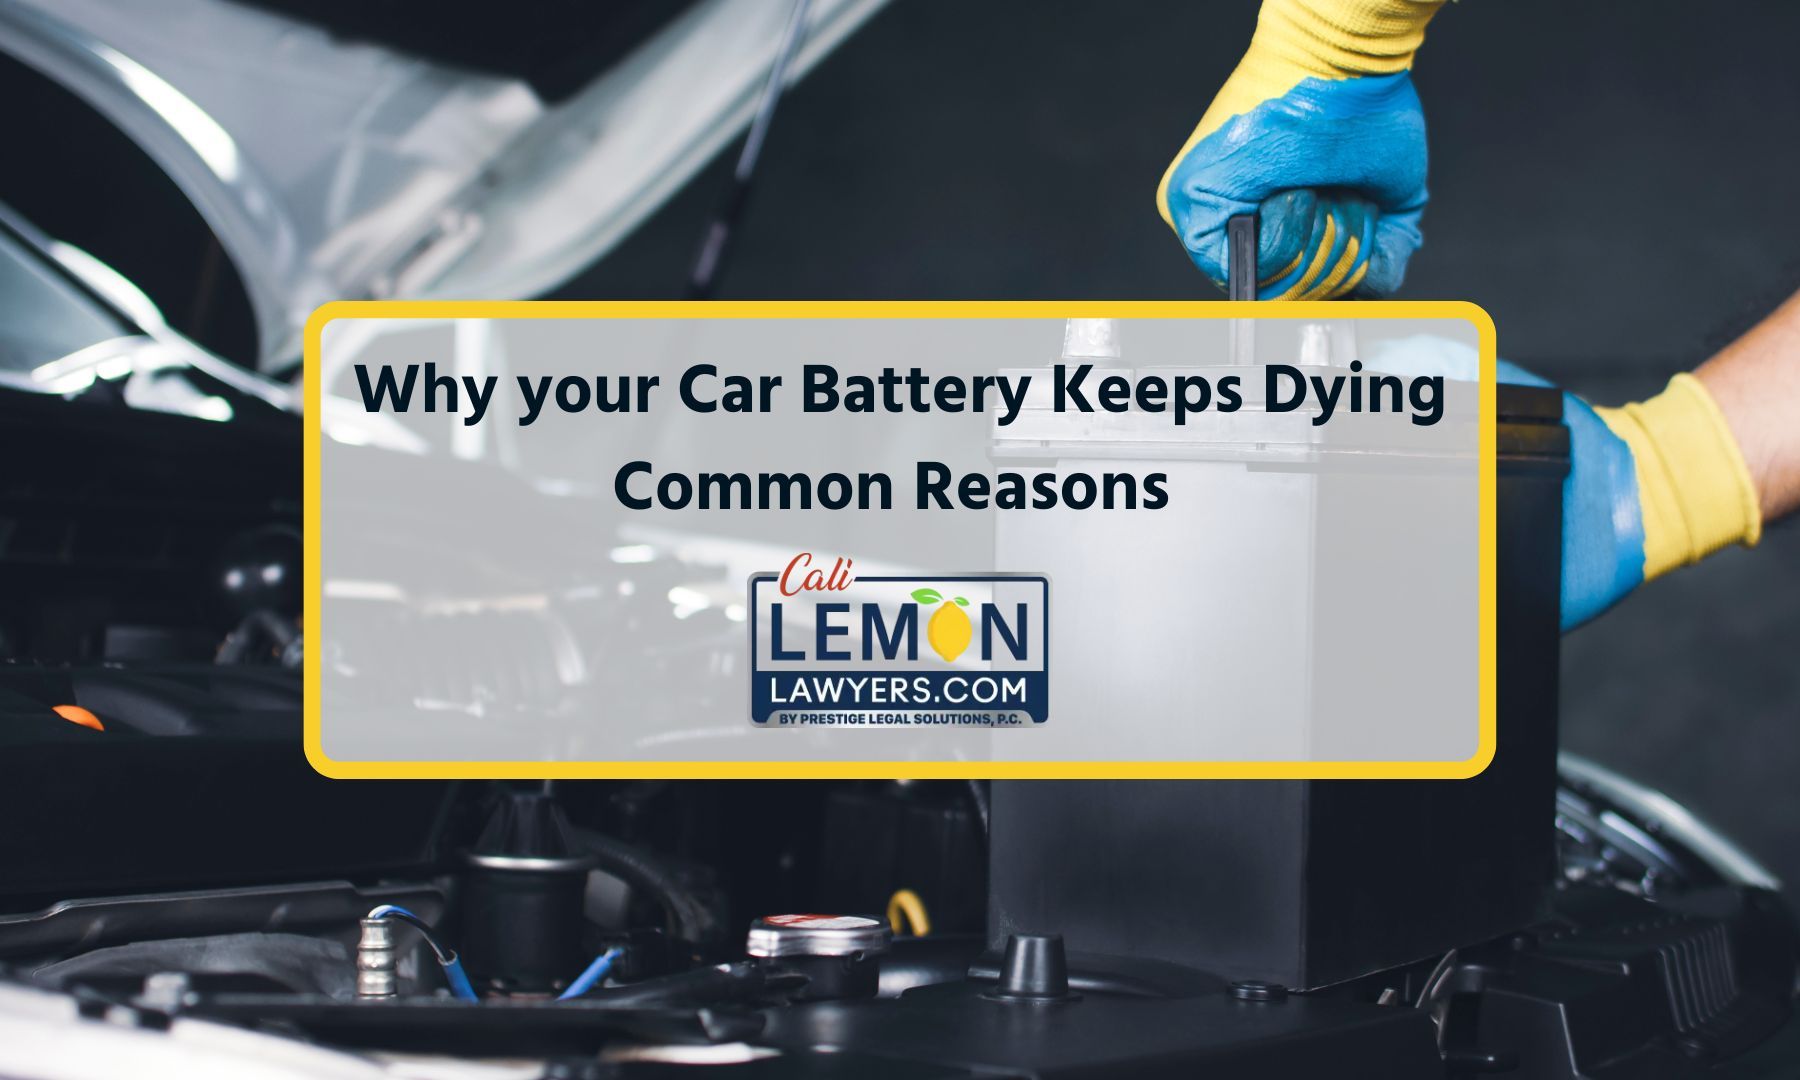 Why Does My Car Battery Keep Dying?